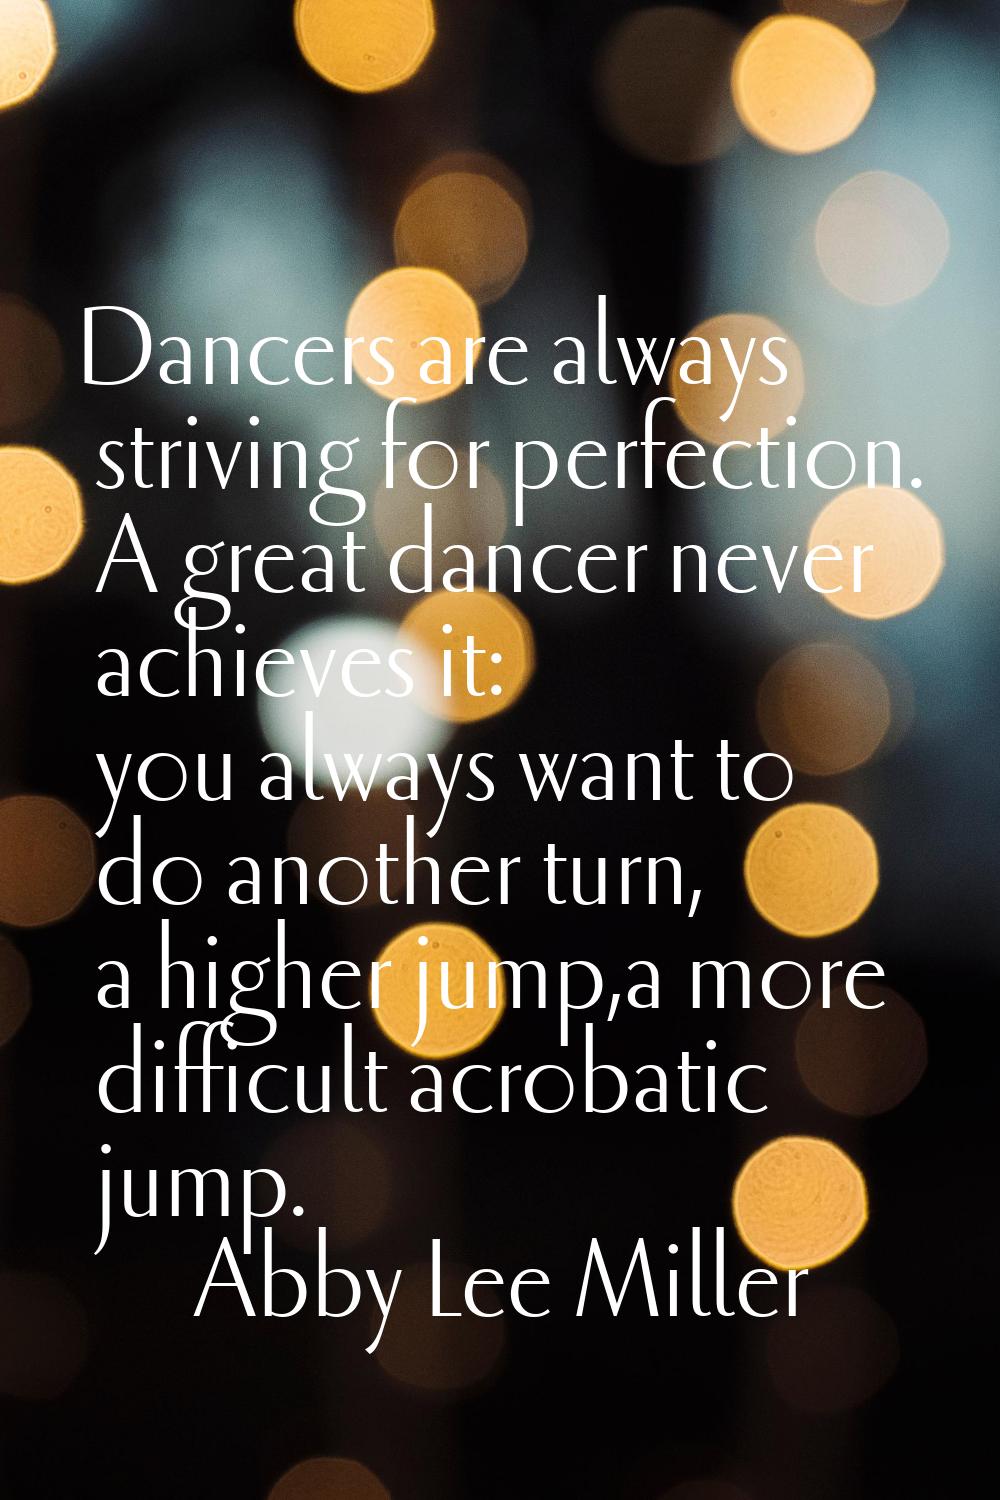 Dancers are always striving for perfection. A great dancer never achieves it: you always want to do